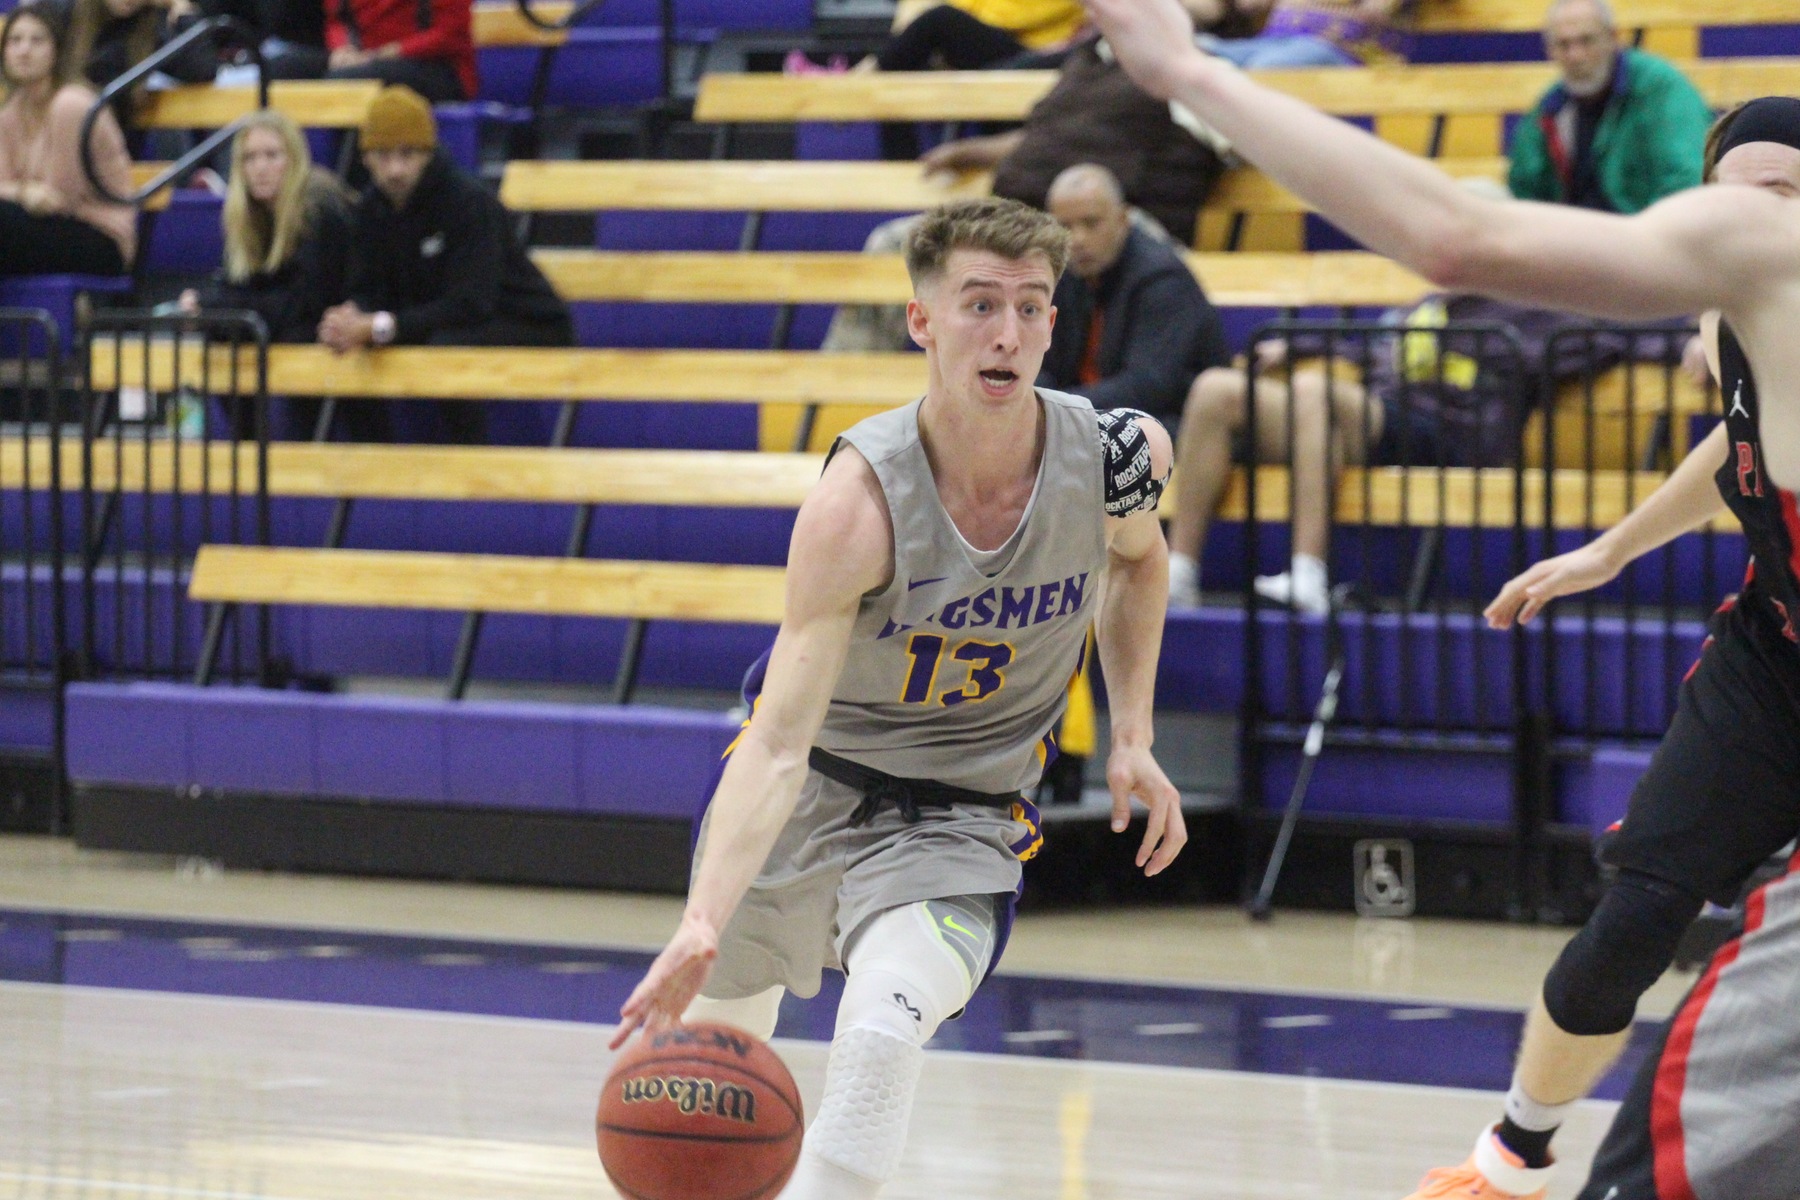 Palmer Chaplin scored nine points and grabbed a career-high 11 rebounds as the Kingsmen defeated Caltech 80-56. (Credit: Danielle Roumbos)